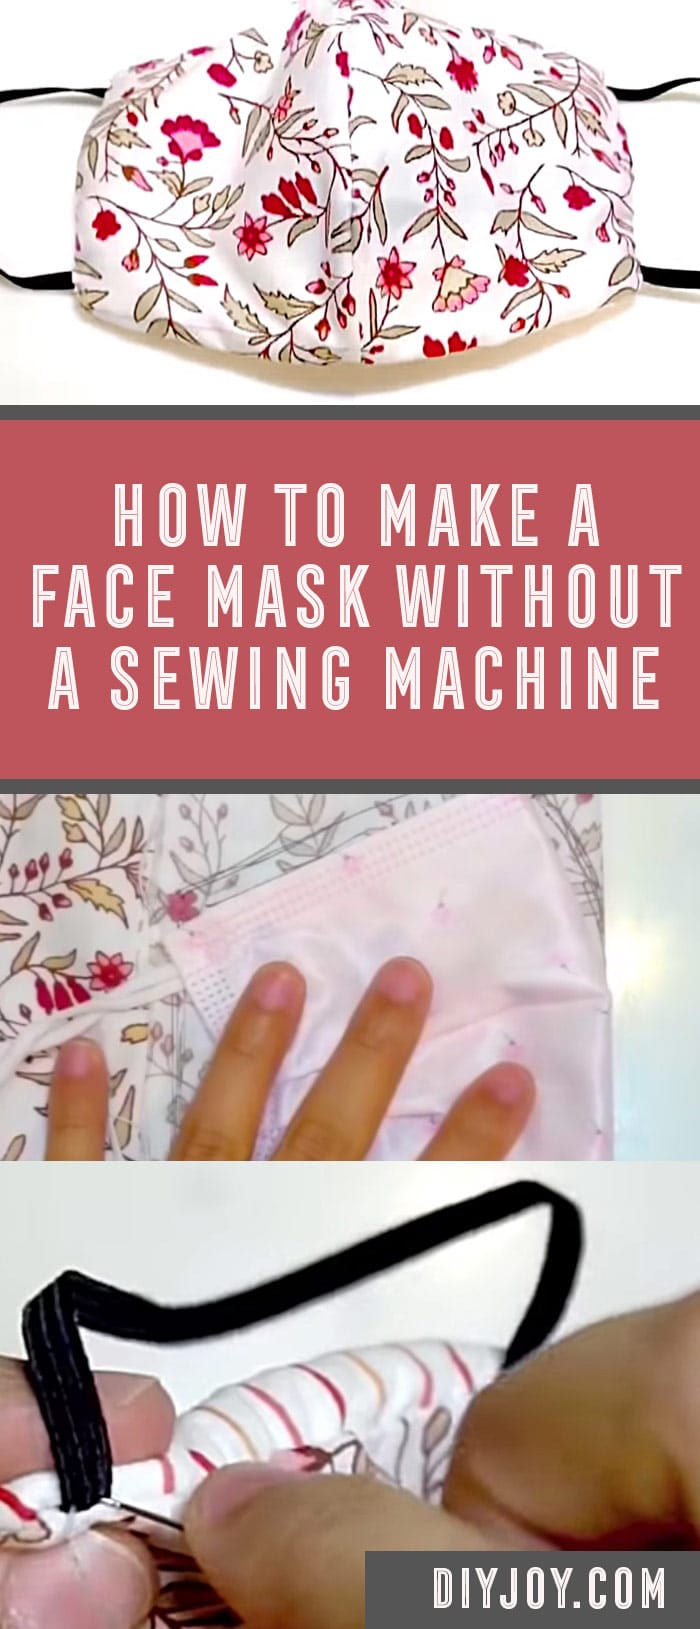 How to Make A Face Mask Without a Sewing Machine - Easy DIY Face Mask Tutorial